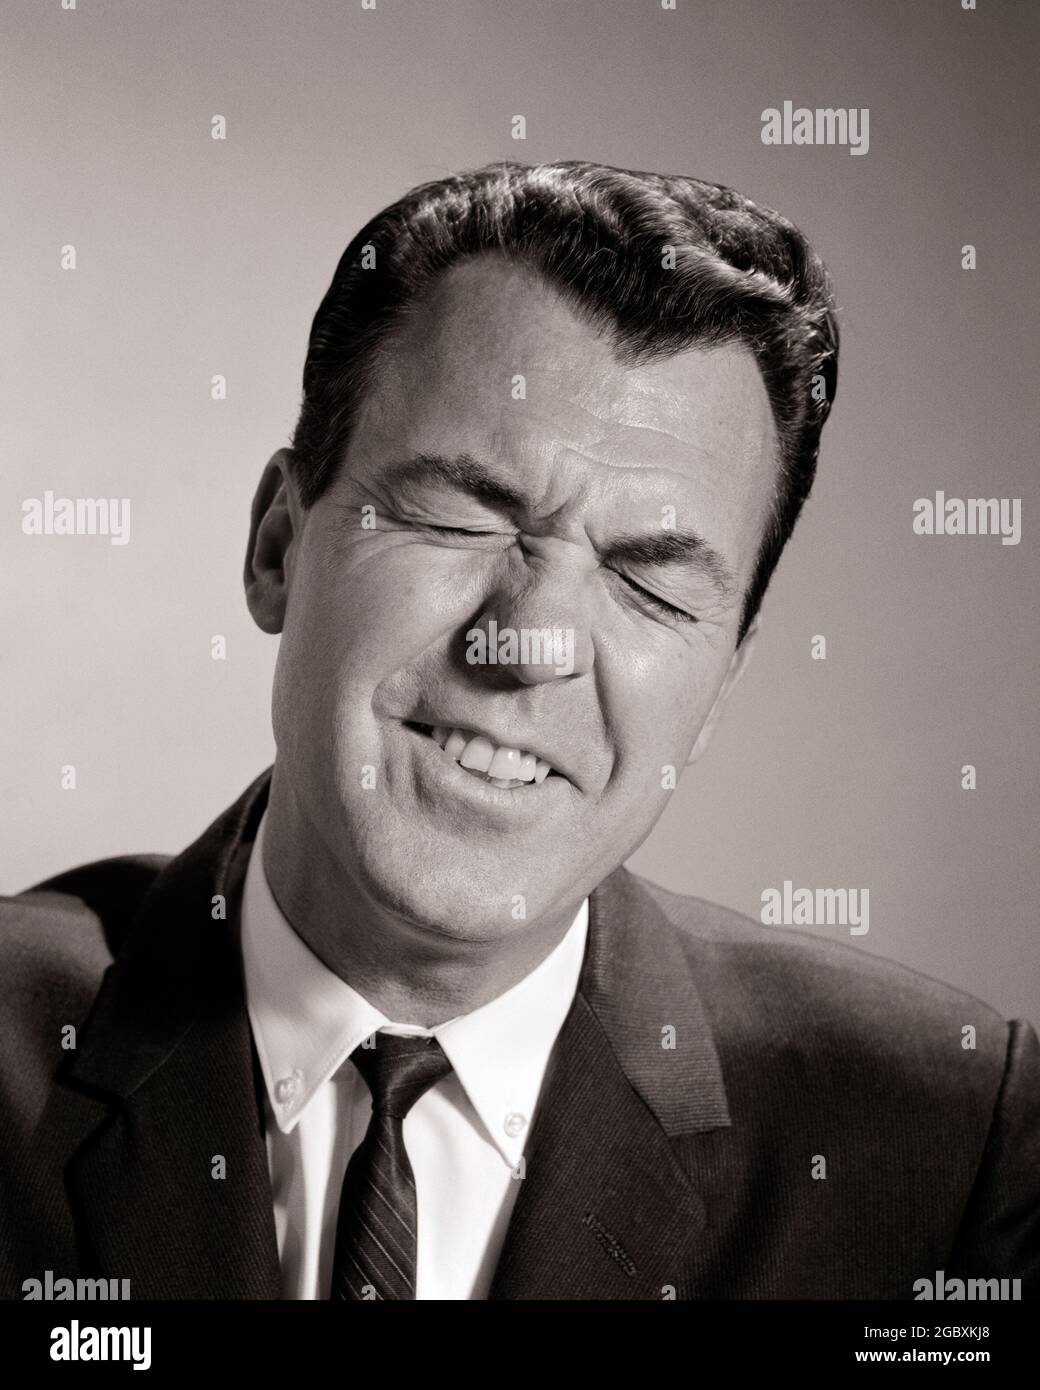 1950s 1960s BUSINESS MAN SQUINTING EYES CLOSED FUNNY FACIAL EXPRESSION EXASPERATED ABOUT TO SNEEZE  - p7024 HAR001 HARS PERSONS MALES RISK B&W FRUSTRATED BIZARRE BRUNETTE WEIRD HEAD AND SHOULDERS DISCOVERY SORRY GROTESQUE SQUINTING ZANY UNCONVENTIONAL FRUSTRATION POLITICS TEMPER ASHAMED CONCEPTUAL WACKY IDIOSYNCRATIC REGRET SQUINT AMUSING ECCENTRIC EXASPERATED IRRITATED MID-ADULT MID-ADULT MAN SMIRKING BLACK AND WHITE CAUCASIAN ETHNICITY ERRATIC EYES CLOSED HAR001 OLD FASHIONED OUTRAGEOUS Stock Photo